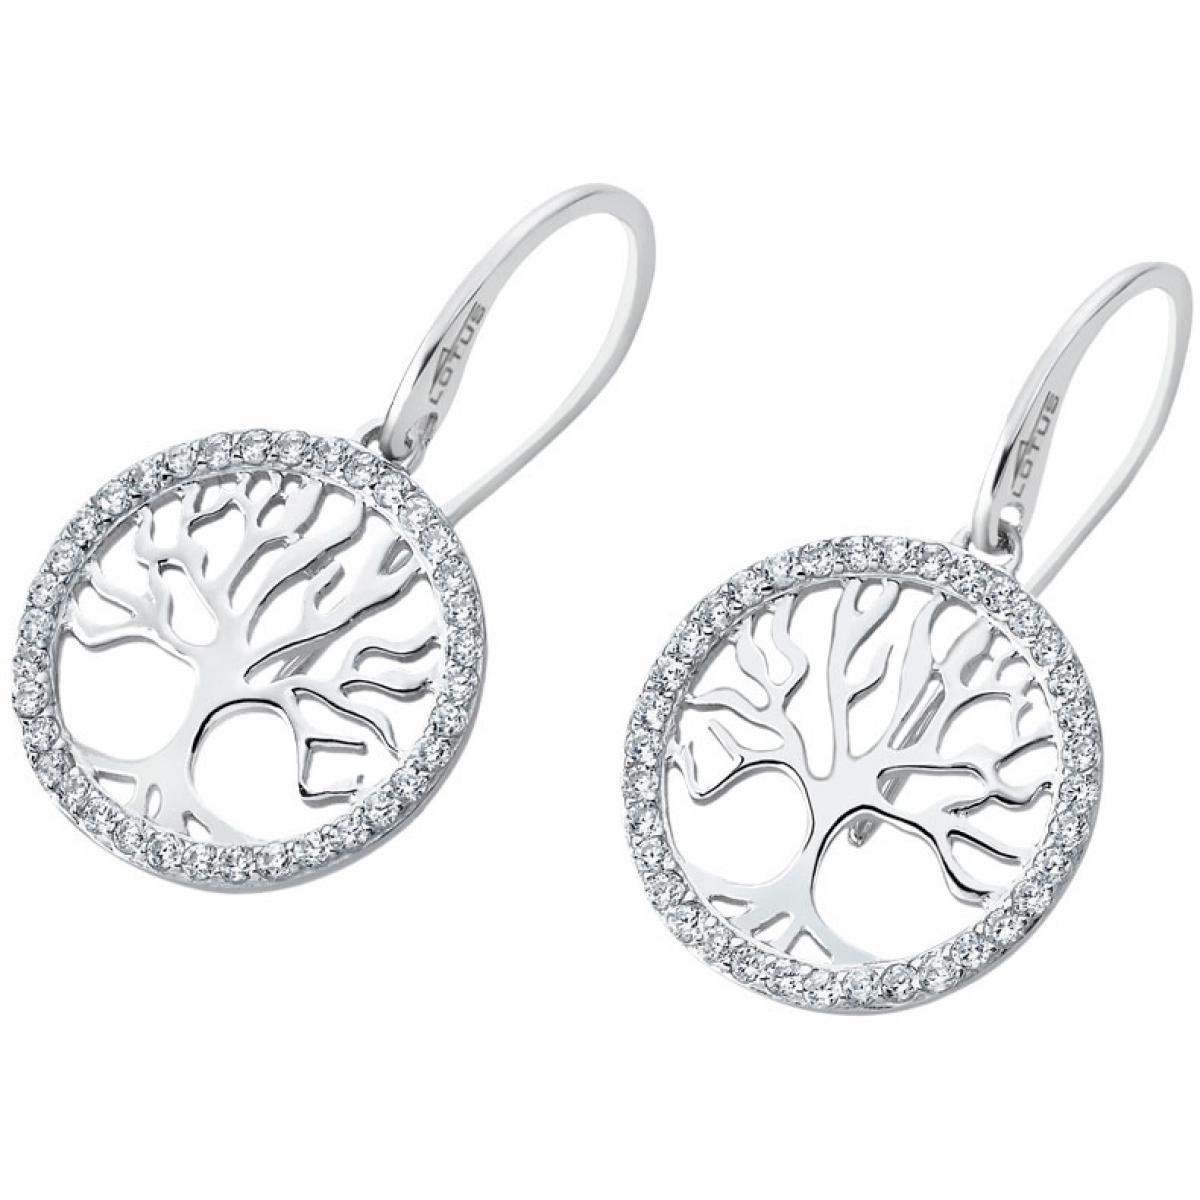 Boucles d'oreilles Lotus Silver TREE OF LIFE LP1779-4-1 - Boucles d'oreilles TREE OF LIFE Argent